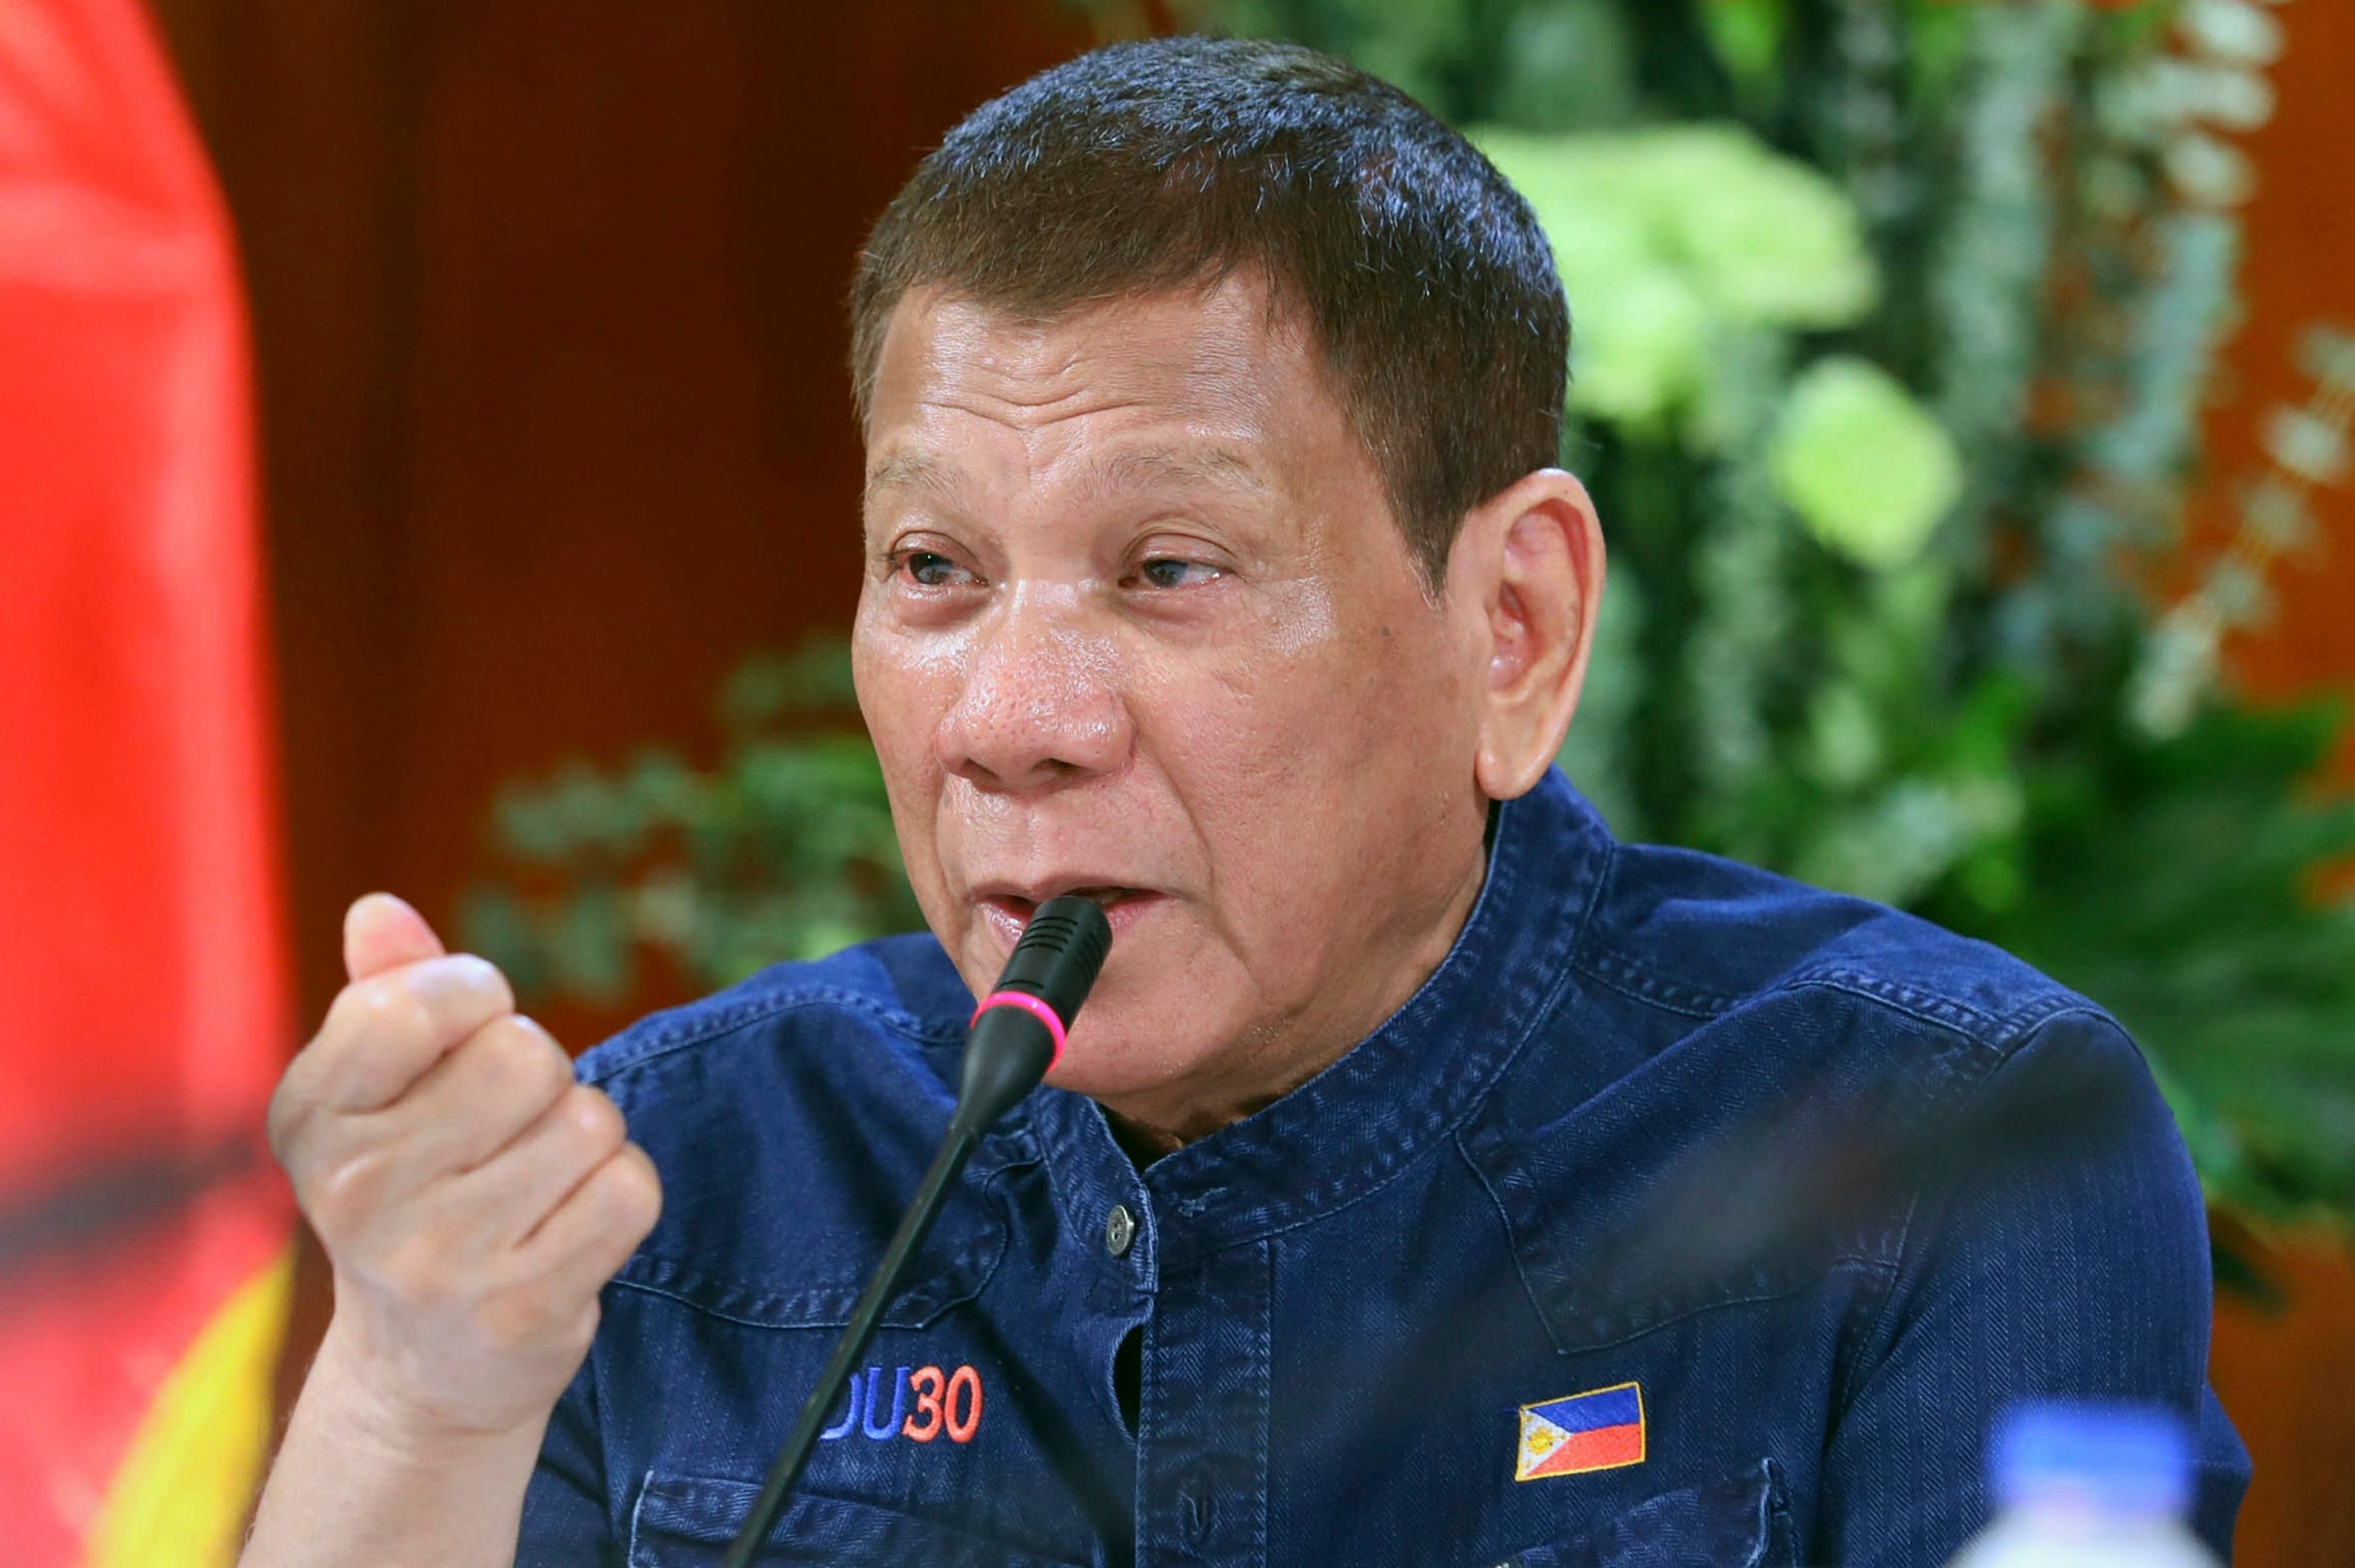 Duterte played down the virus early on in the pandemic, before gaining praise for enforcing a strict lockdown